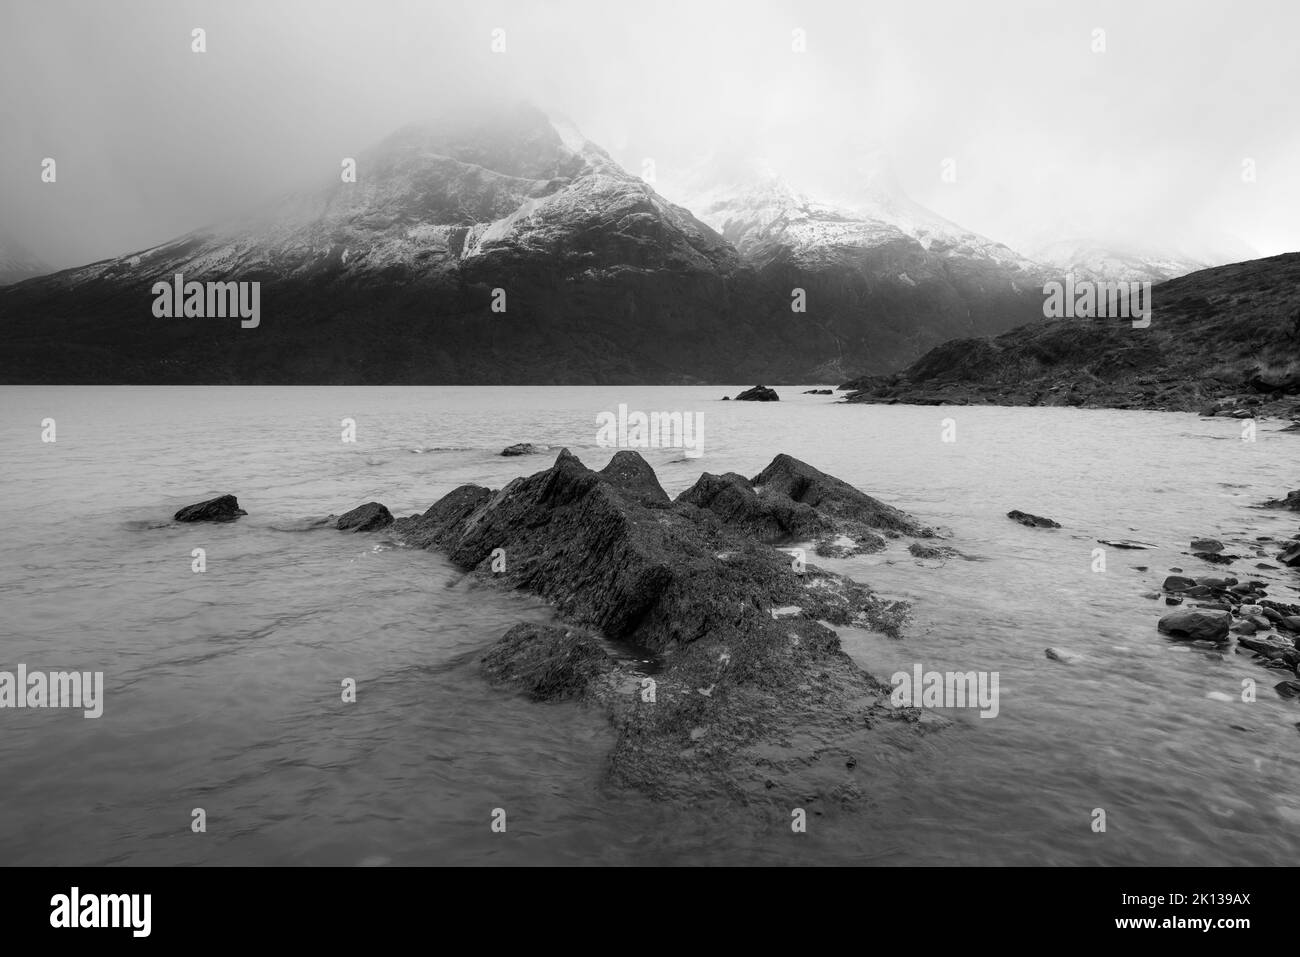 Los Cuernos peaks hiding in fog, Torres del Paine National Park, Patagonia, Chile, South America Stock Photo